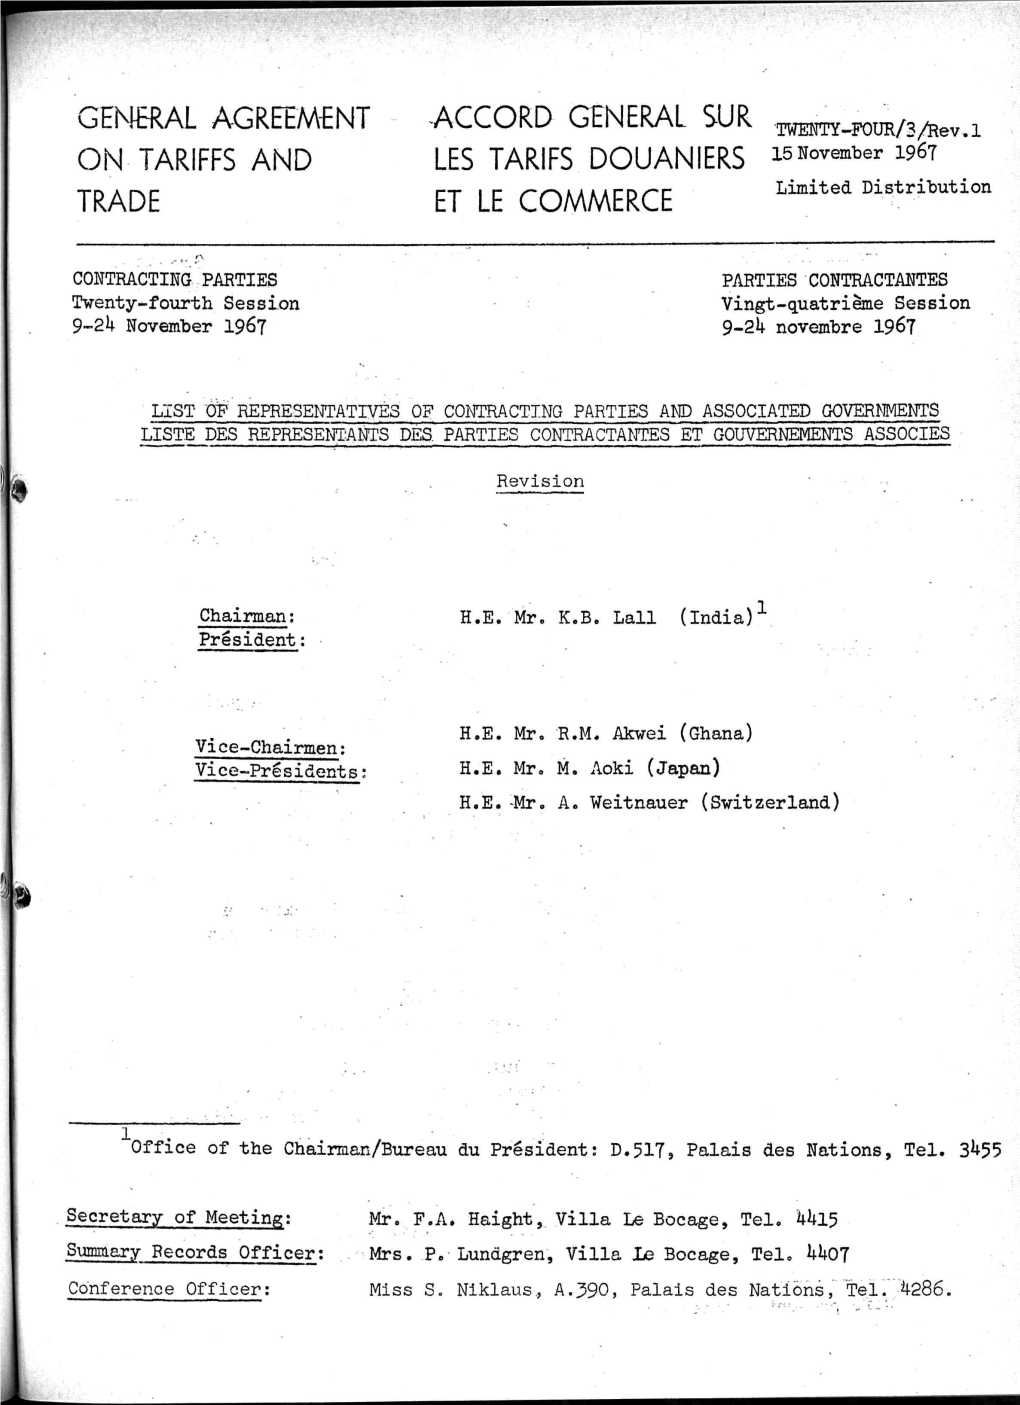 GENERAL AGREEMENT on TARIFFS and TRADE ACCORD GENERAL SUR ^ ^ ^ LES TARIFS DOUANIERS L^November 1967 ET LE COMMERCE